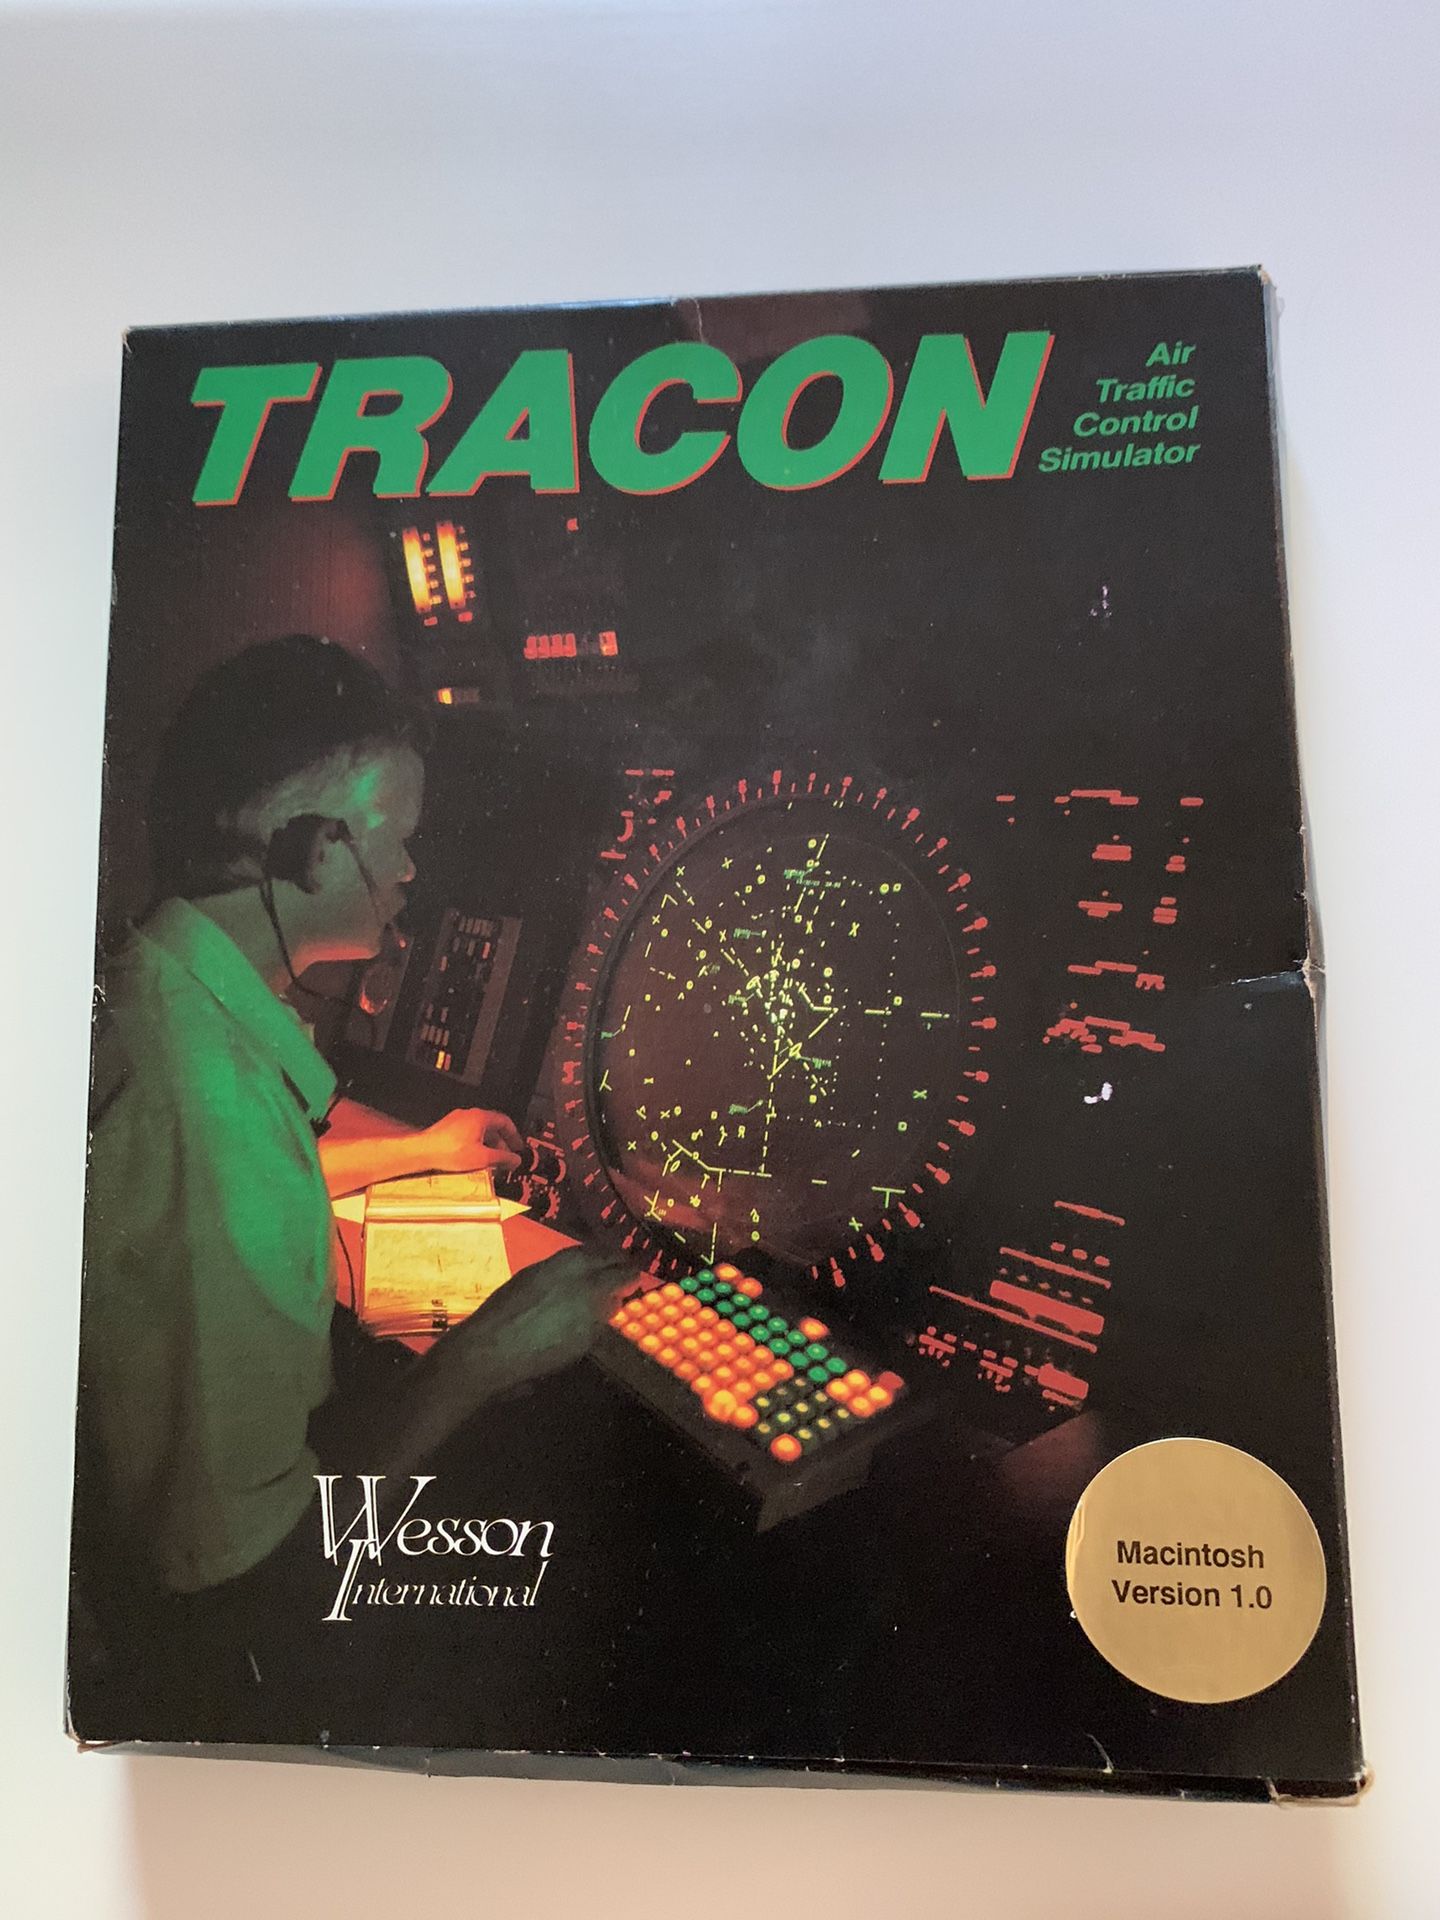 TRACON AIR TRAFFIC CONTROL SIMULATOR for Macs from 1988 COMPLETE SET